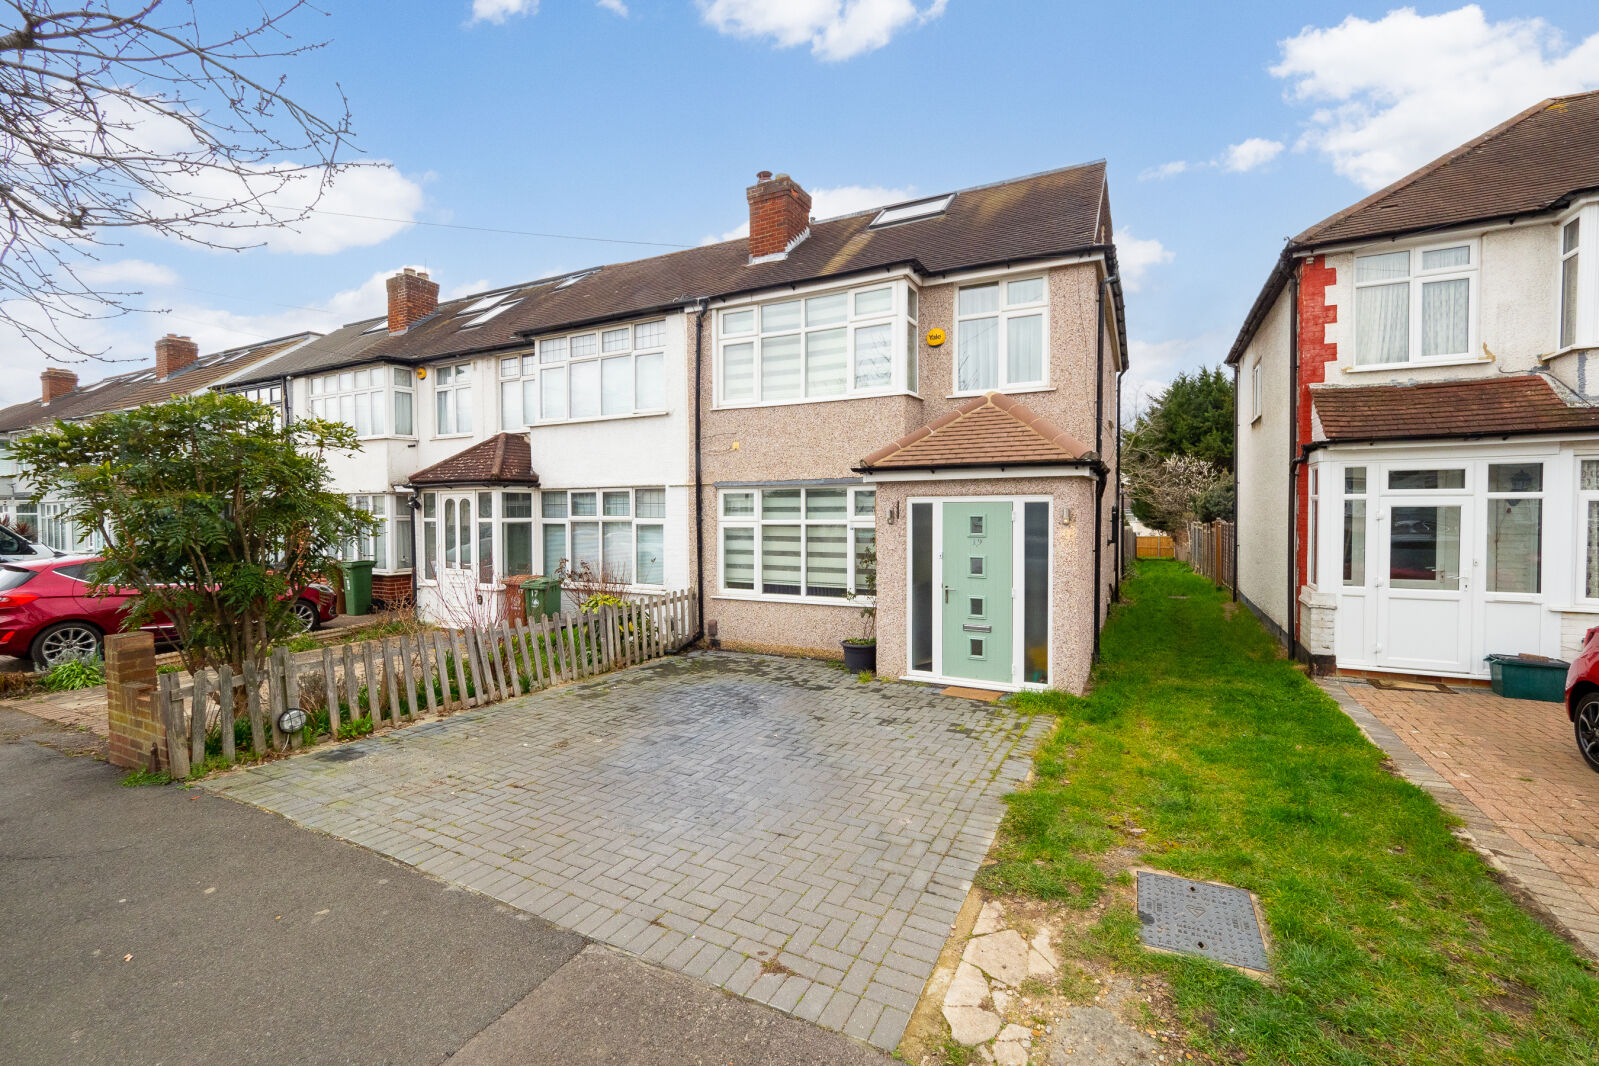 4 bedroom end terraced house for sale St. Margarets Avenue, Cheam, SM3, main image